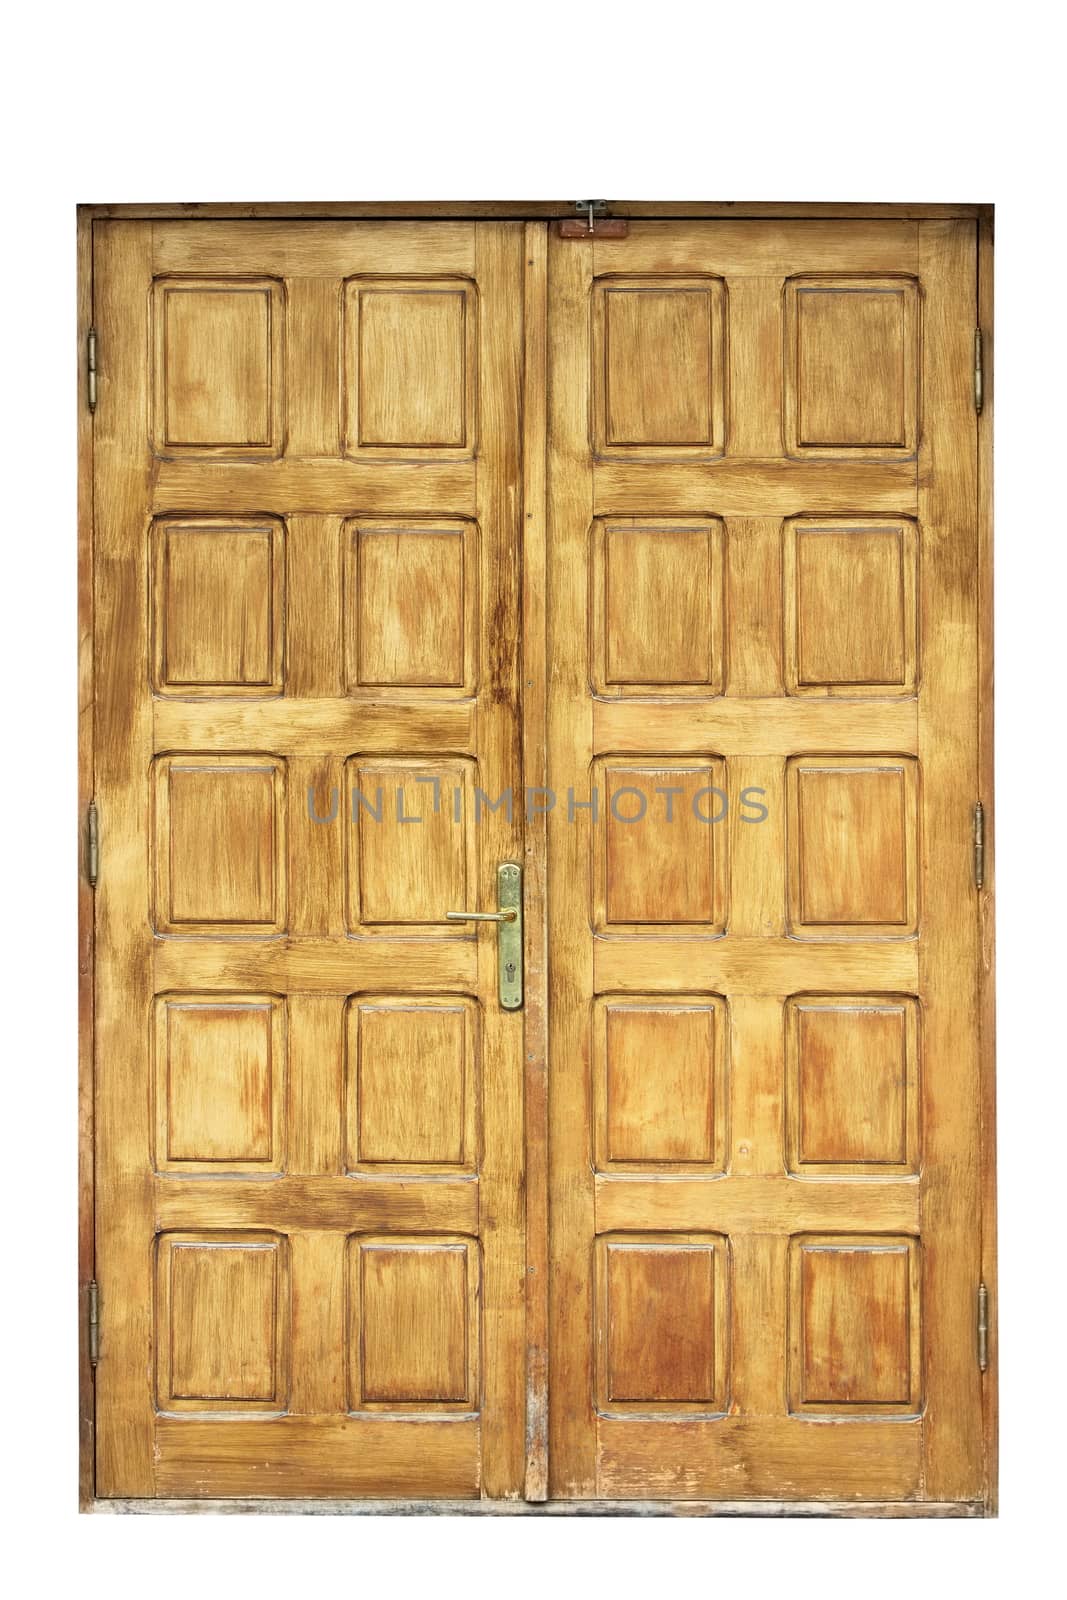 old wooden door for your design by taviphoto